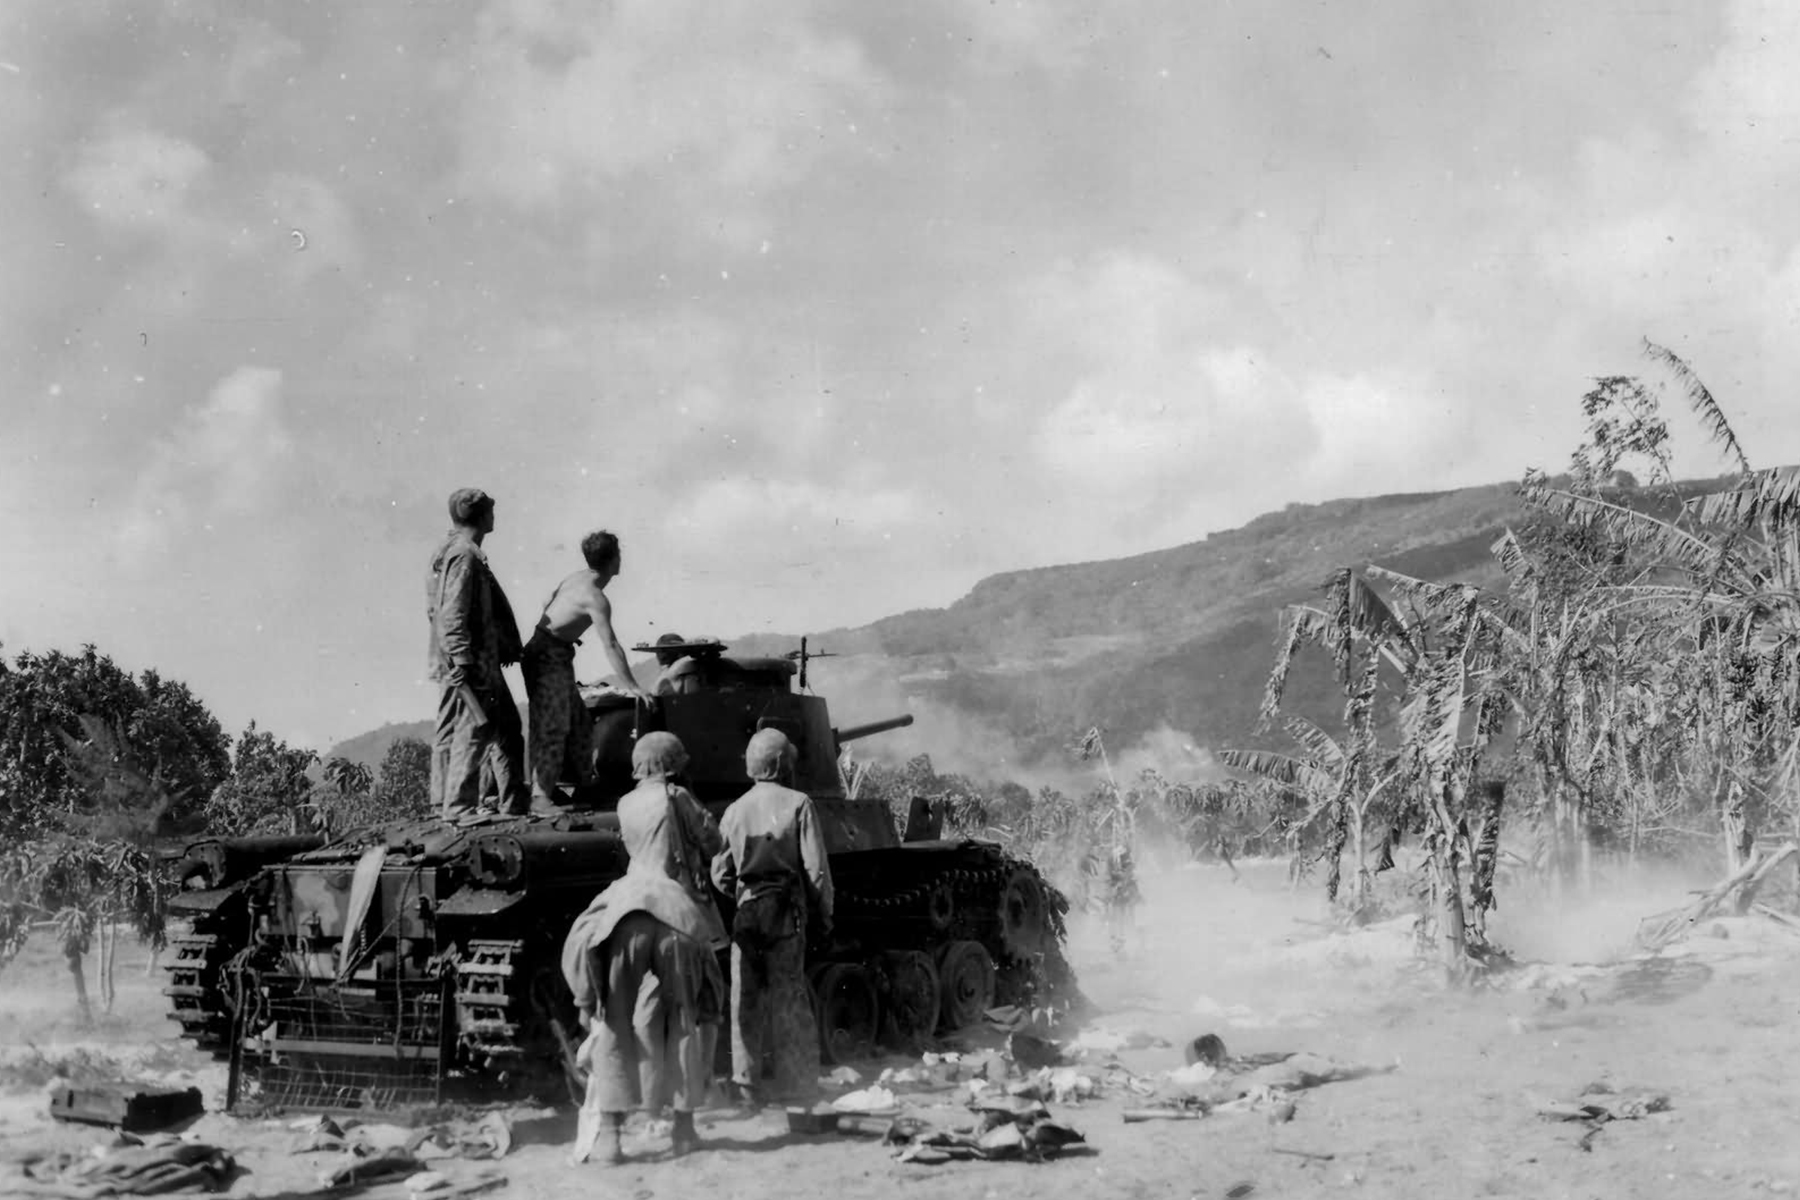 Marines with the 2nd Marine Division use a captured Japanese tank in Saipan in 1944. (Department of Defense/USMC)